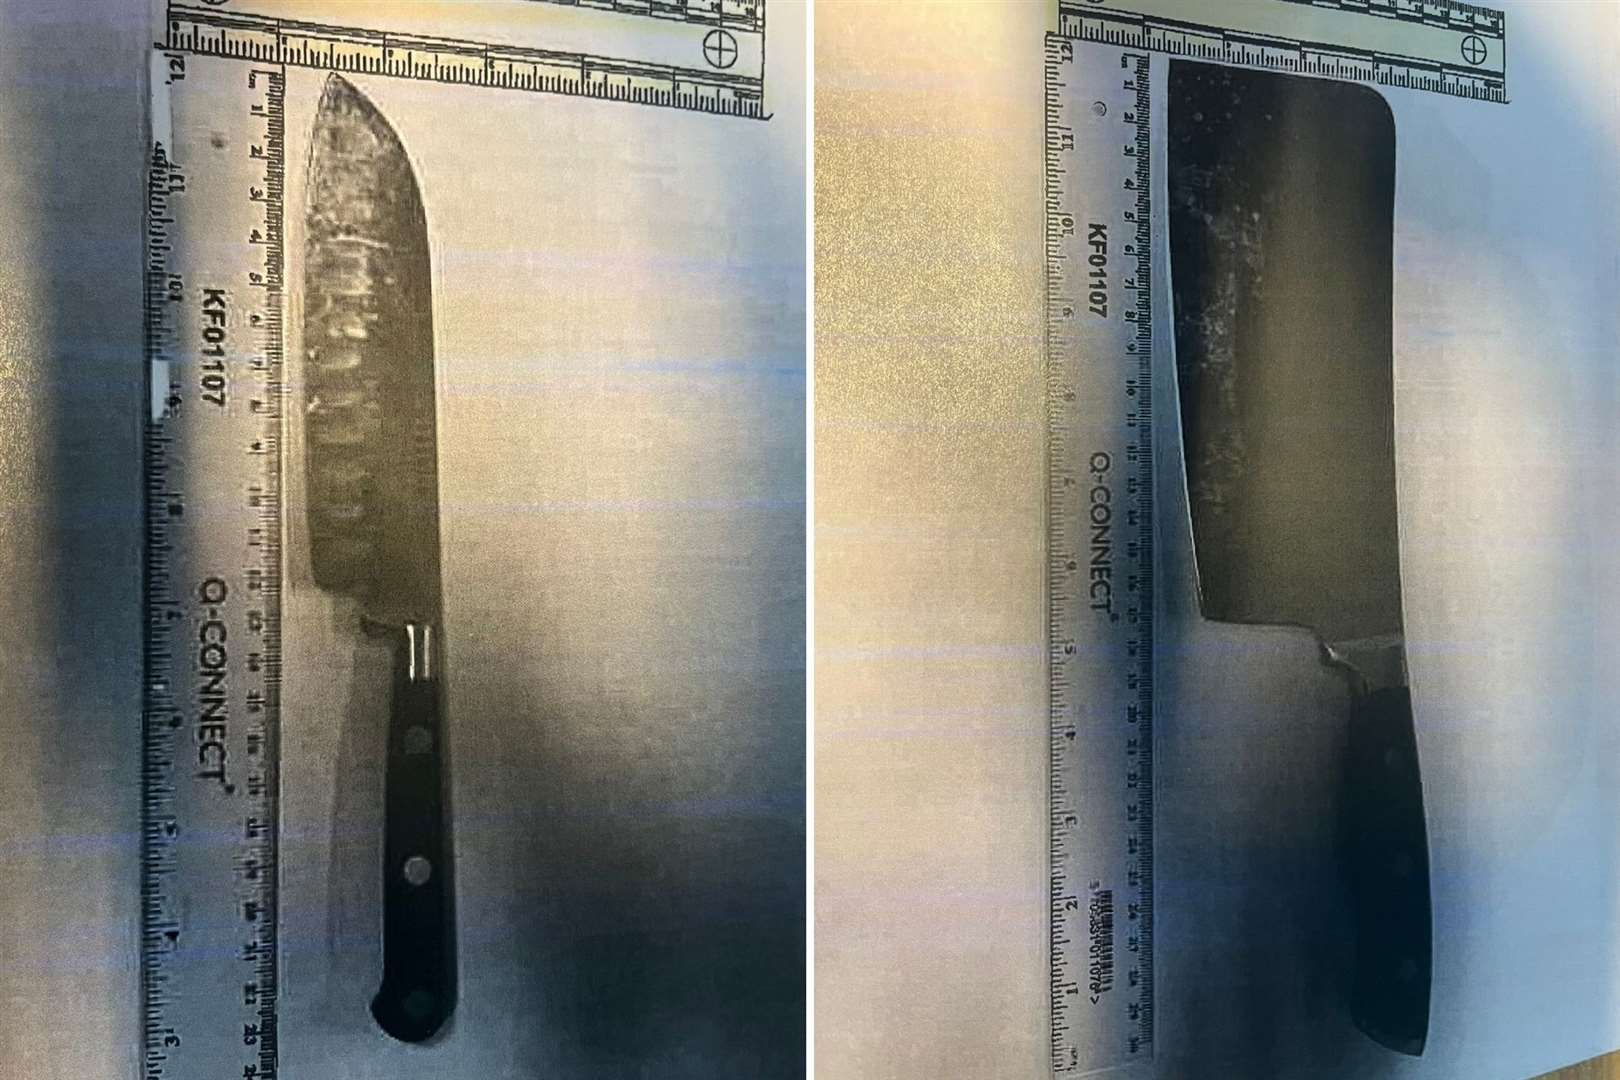 Two more knives were seized when he was arrested. Picture: BTP